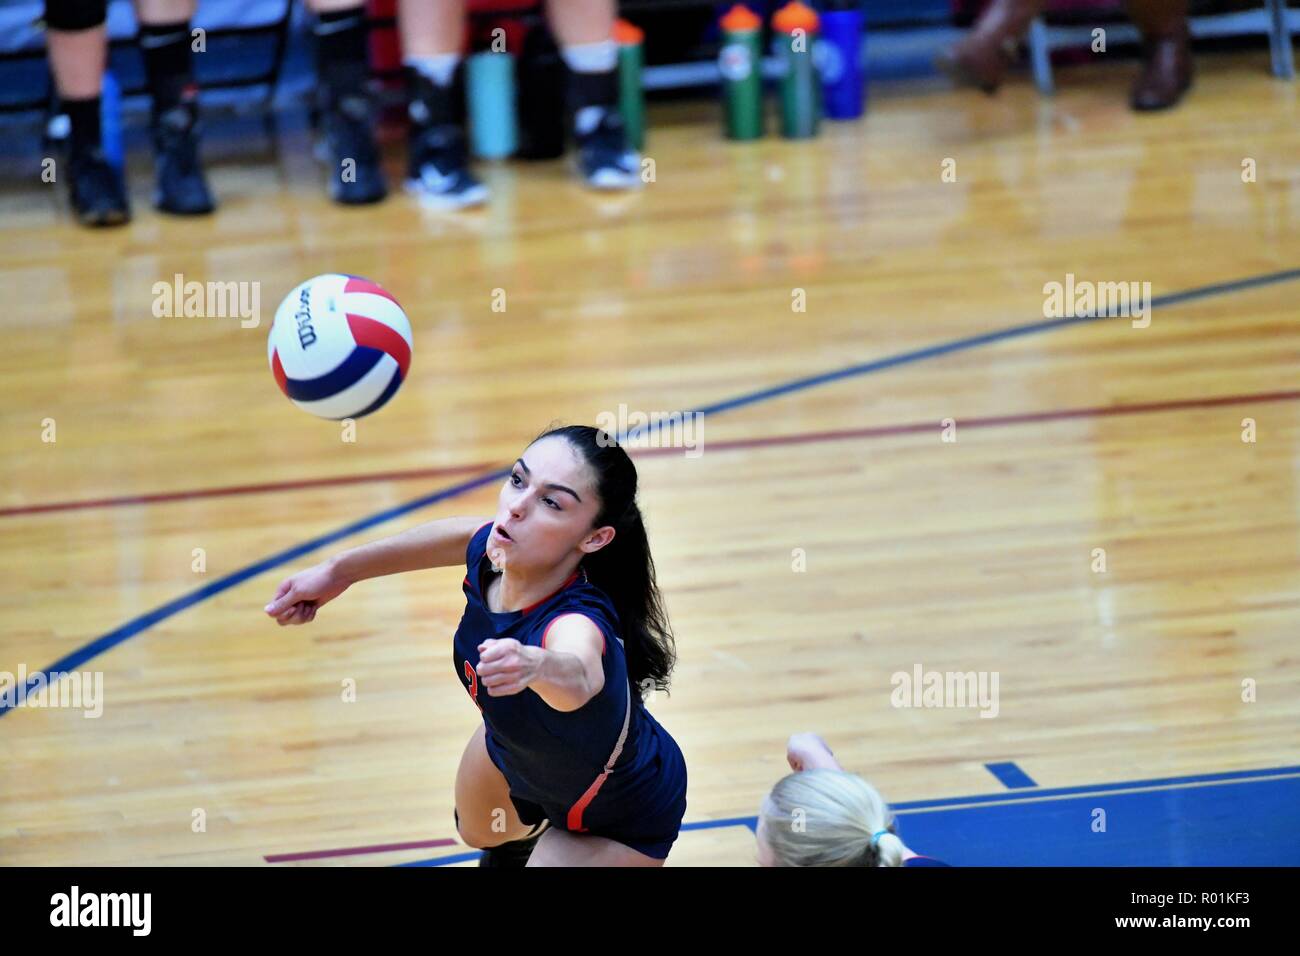 Player extending in reaction to an opponent's kill shot in an effort to sustain a volley. USA. Stock Photo